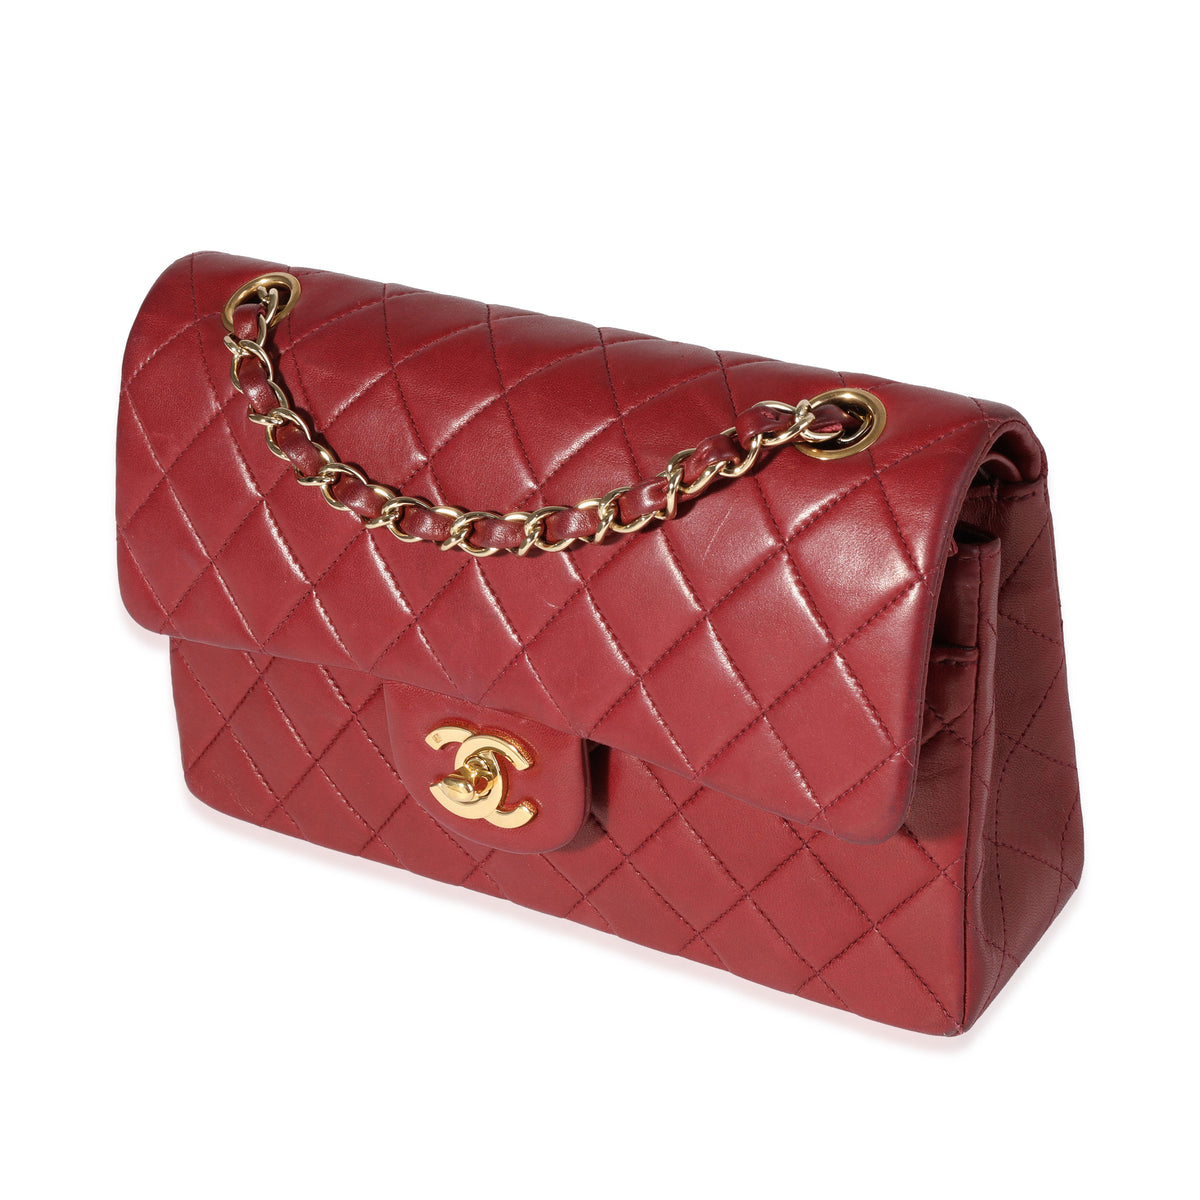 Chanel Burgundy Quilted Lambskin Small Classic Double Flap Bag, myGemma